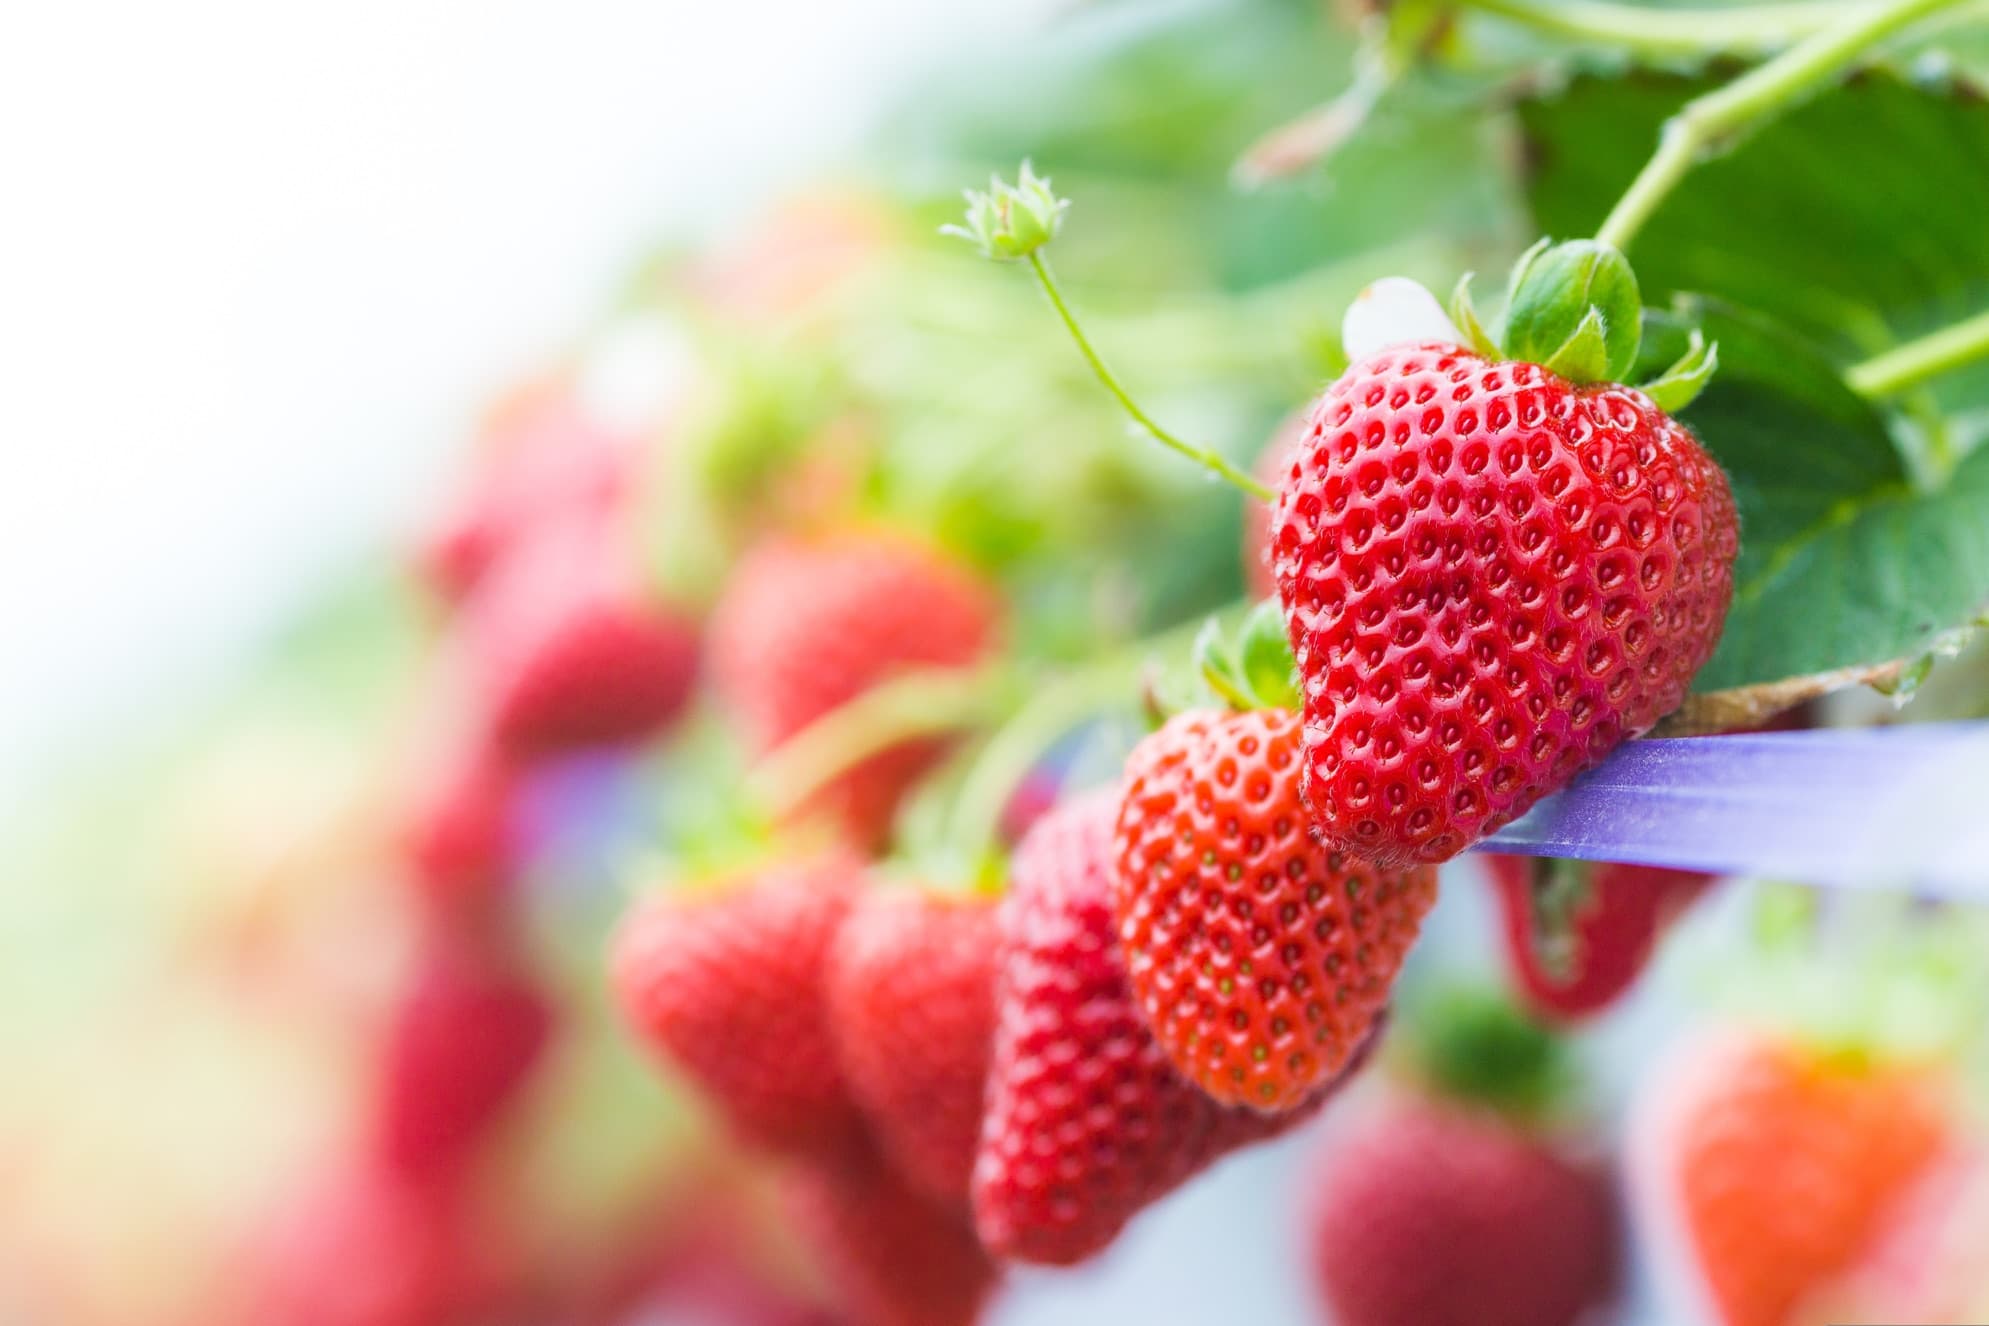 How To Grow Strawberries In Hydroponics